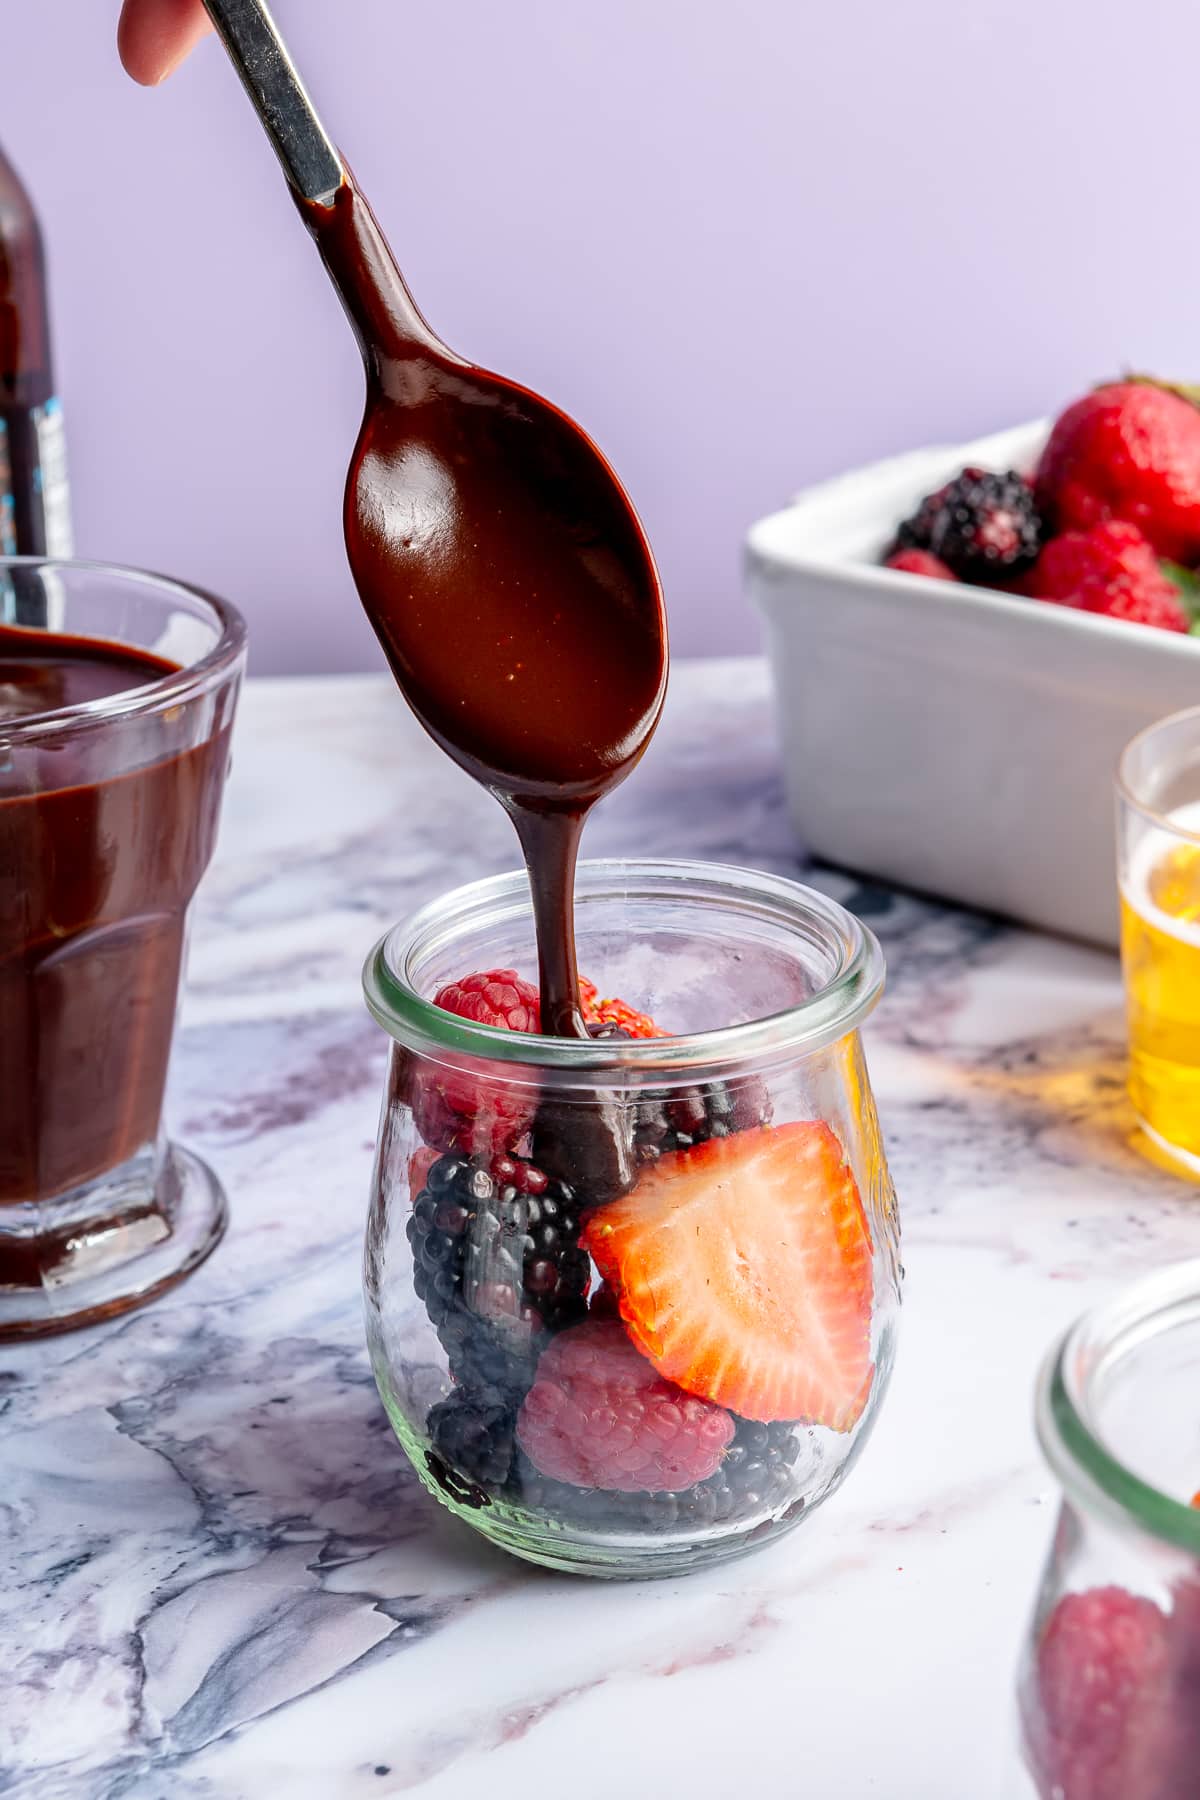 A metal spoon is shown drizzling ganache over a glass cup of fresh berries.